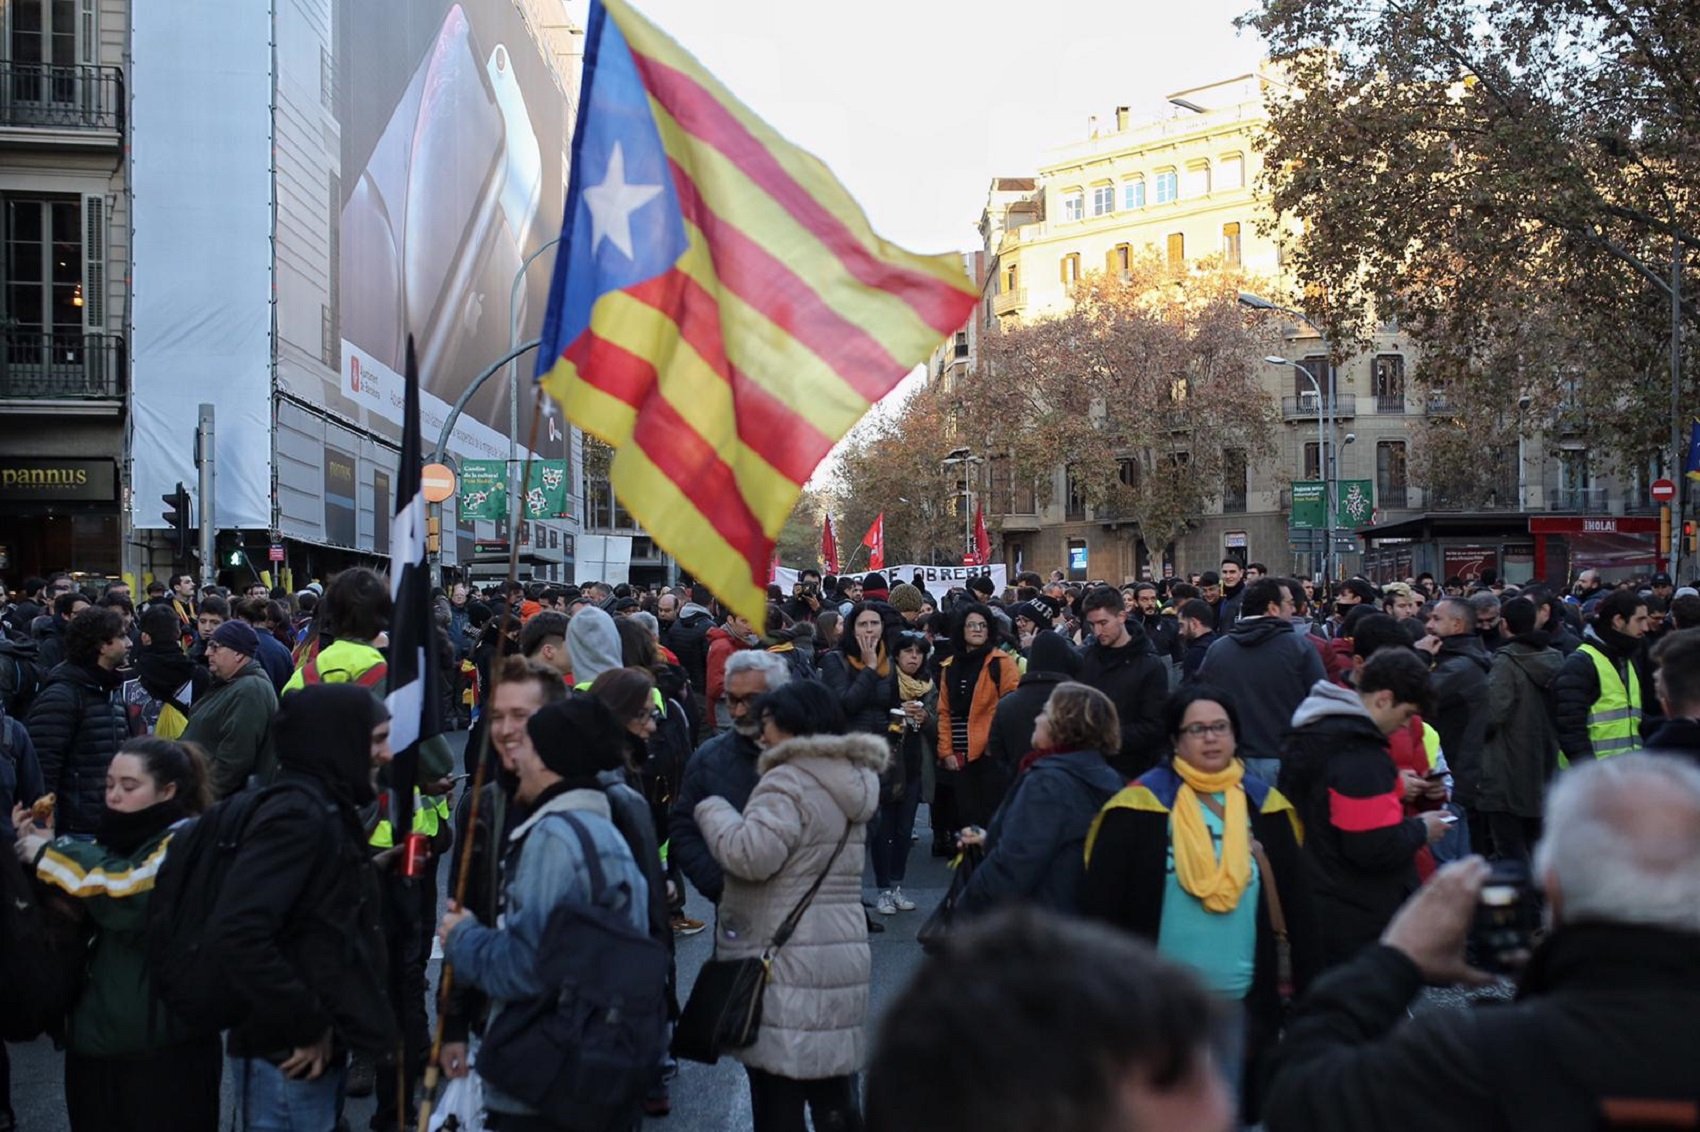 Demonstrations in Barcelona reported on from Israel to Malaysia